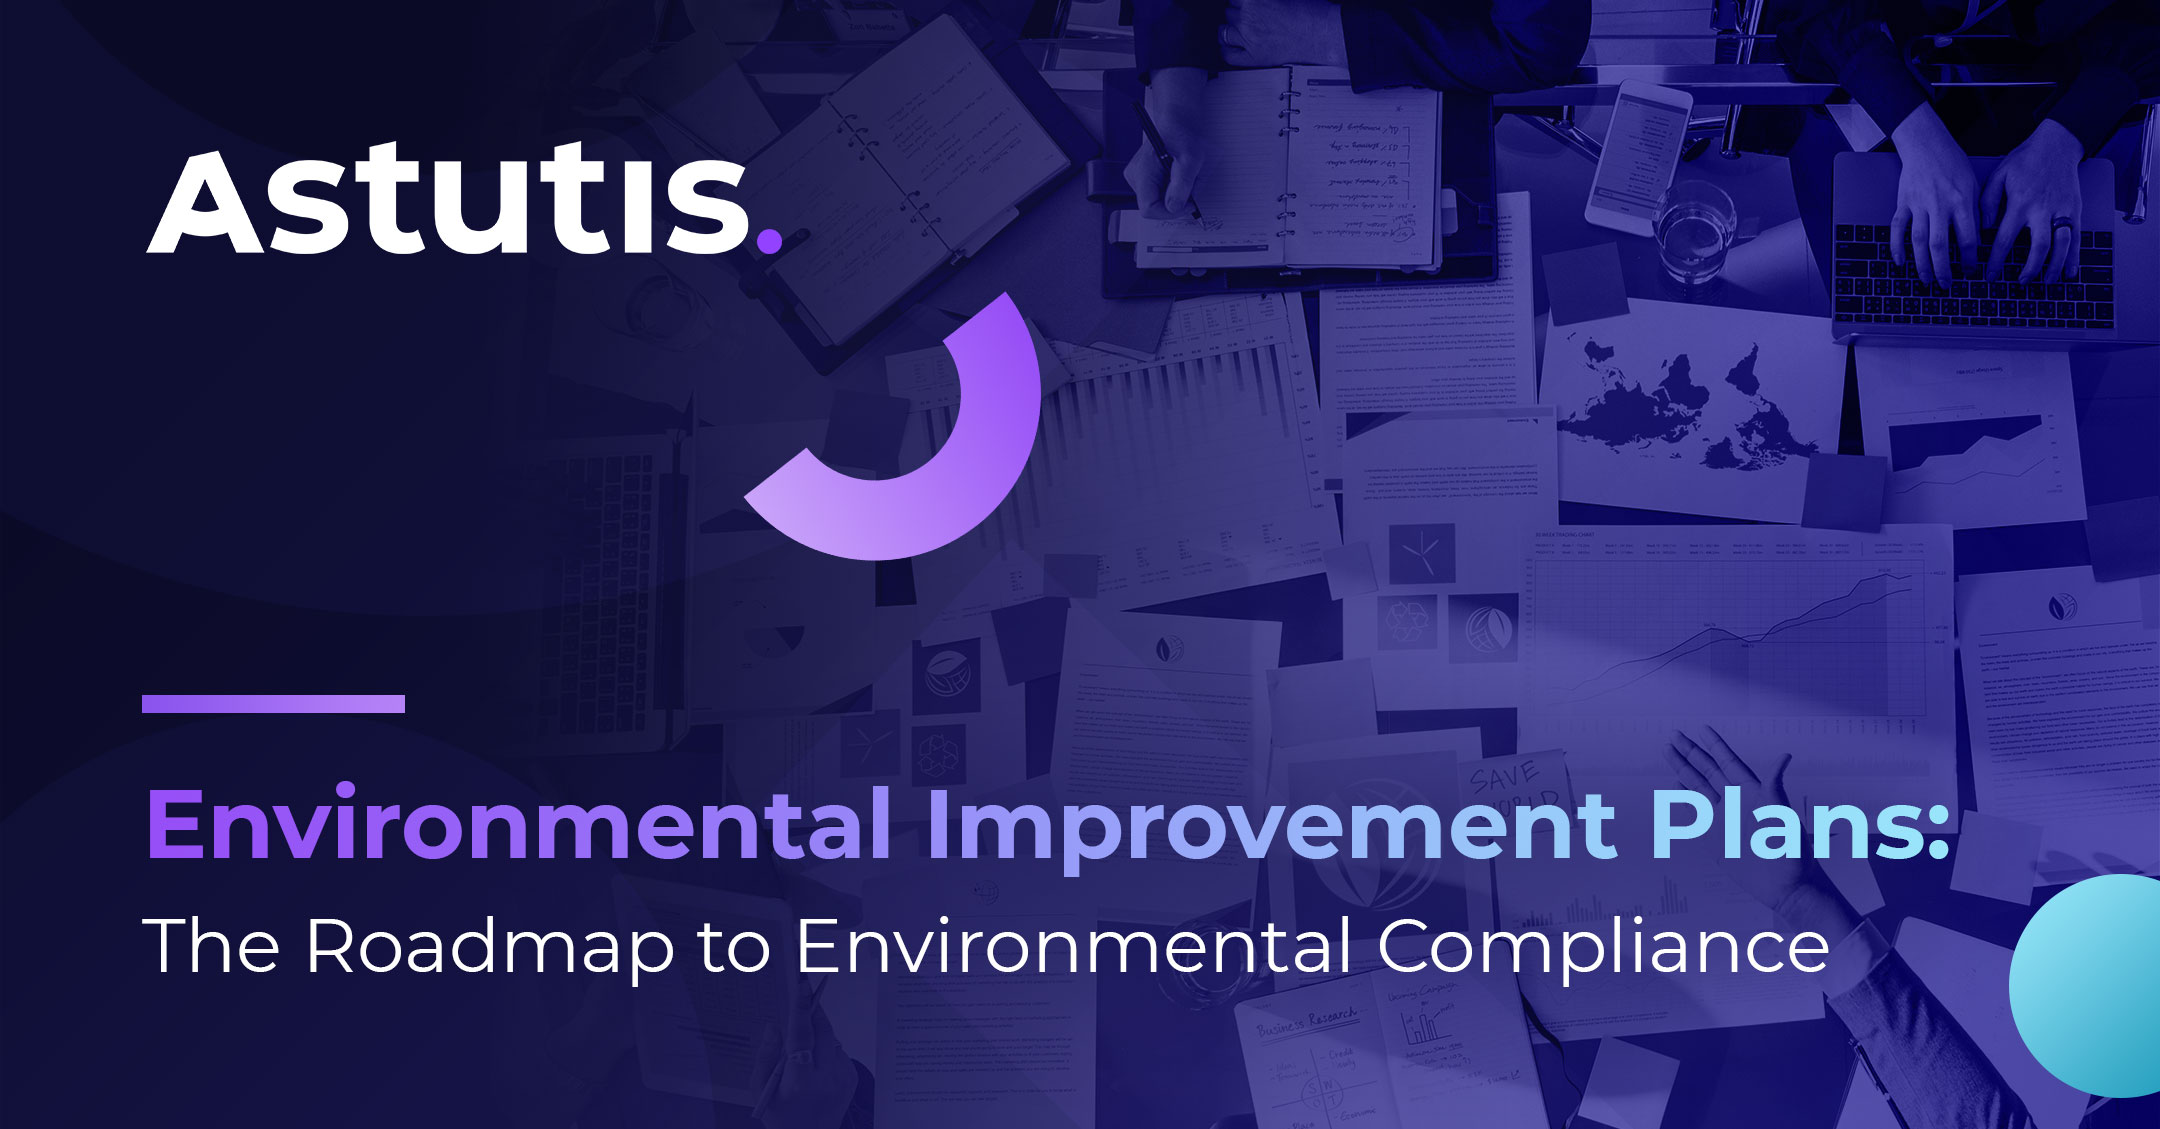 The Roadmap to Environmental Compliance Image